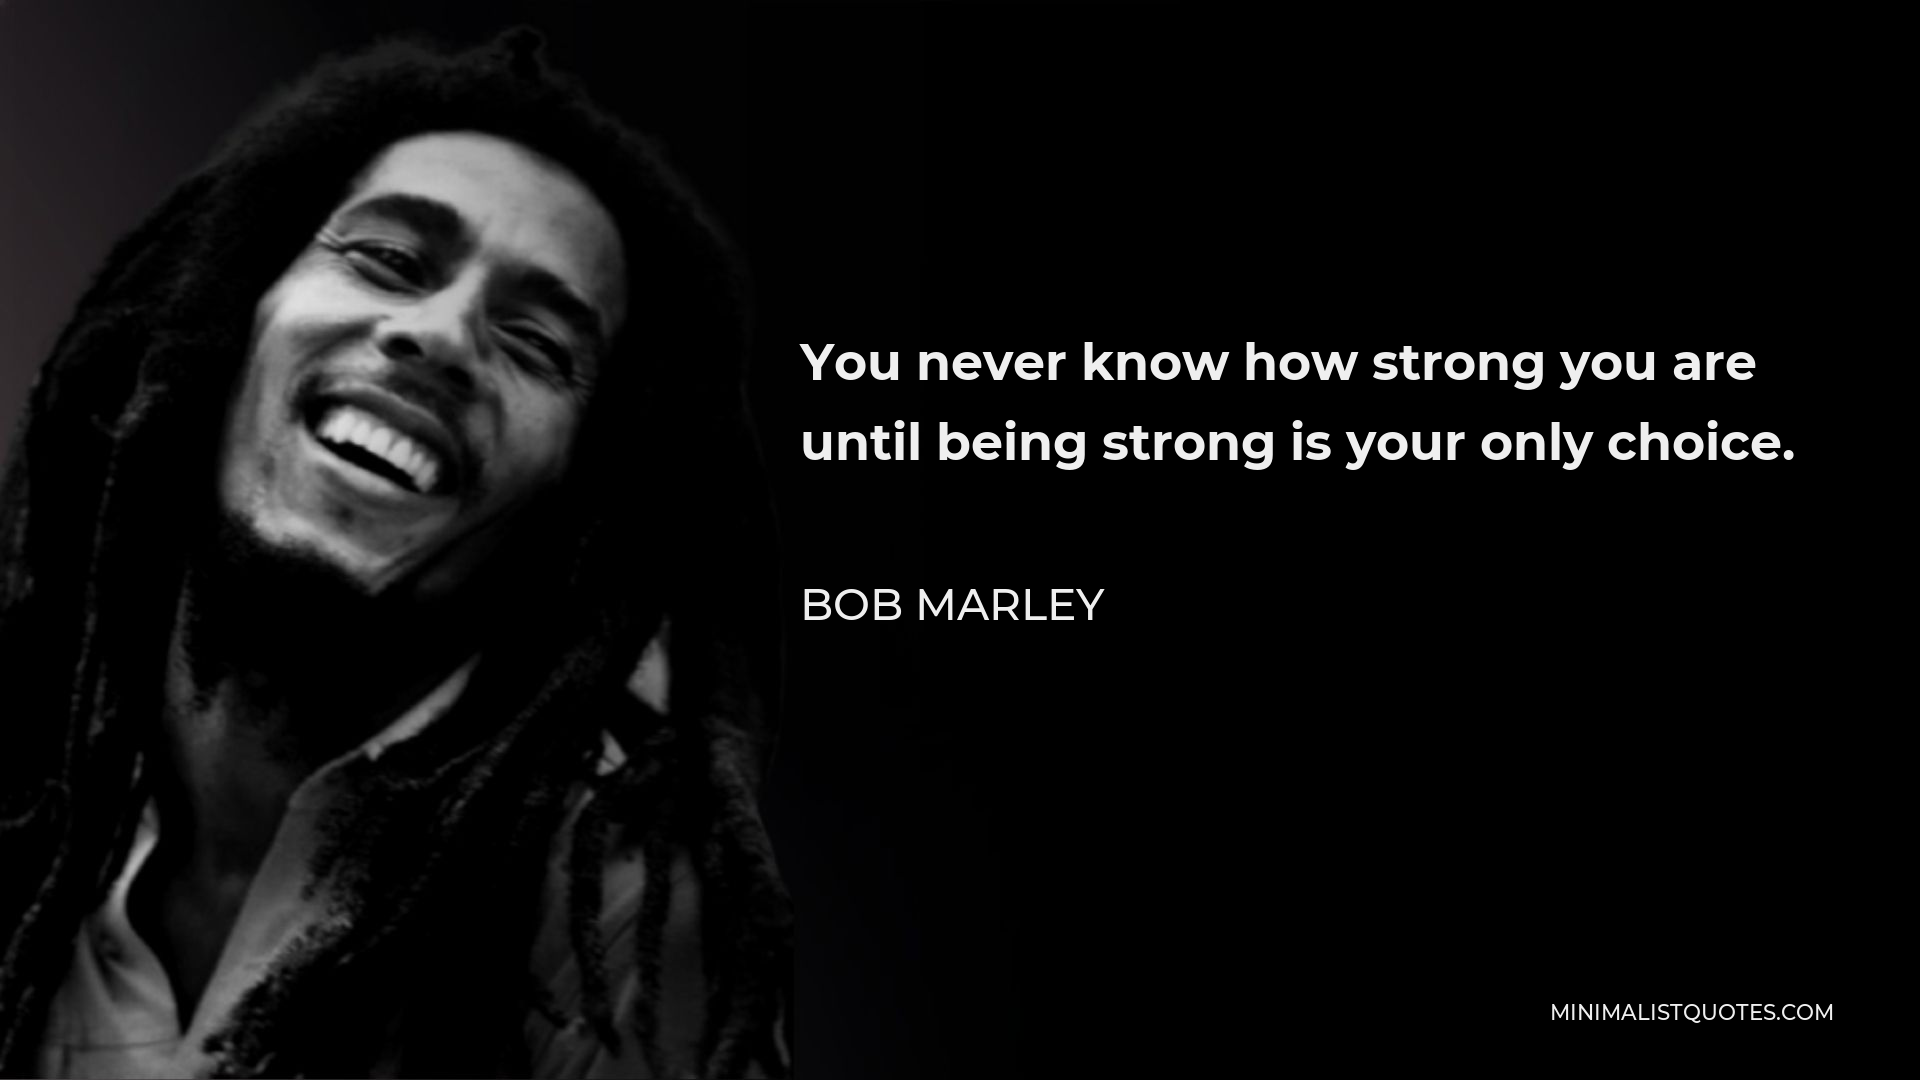 Bob Marley Quote - You never know how strong you are until being strong is your only choice.